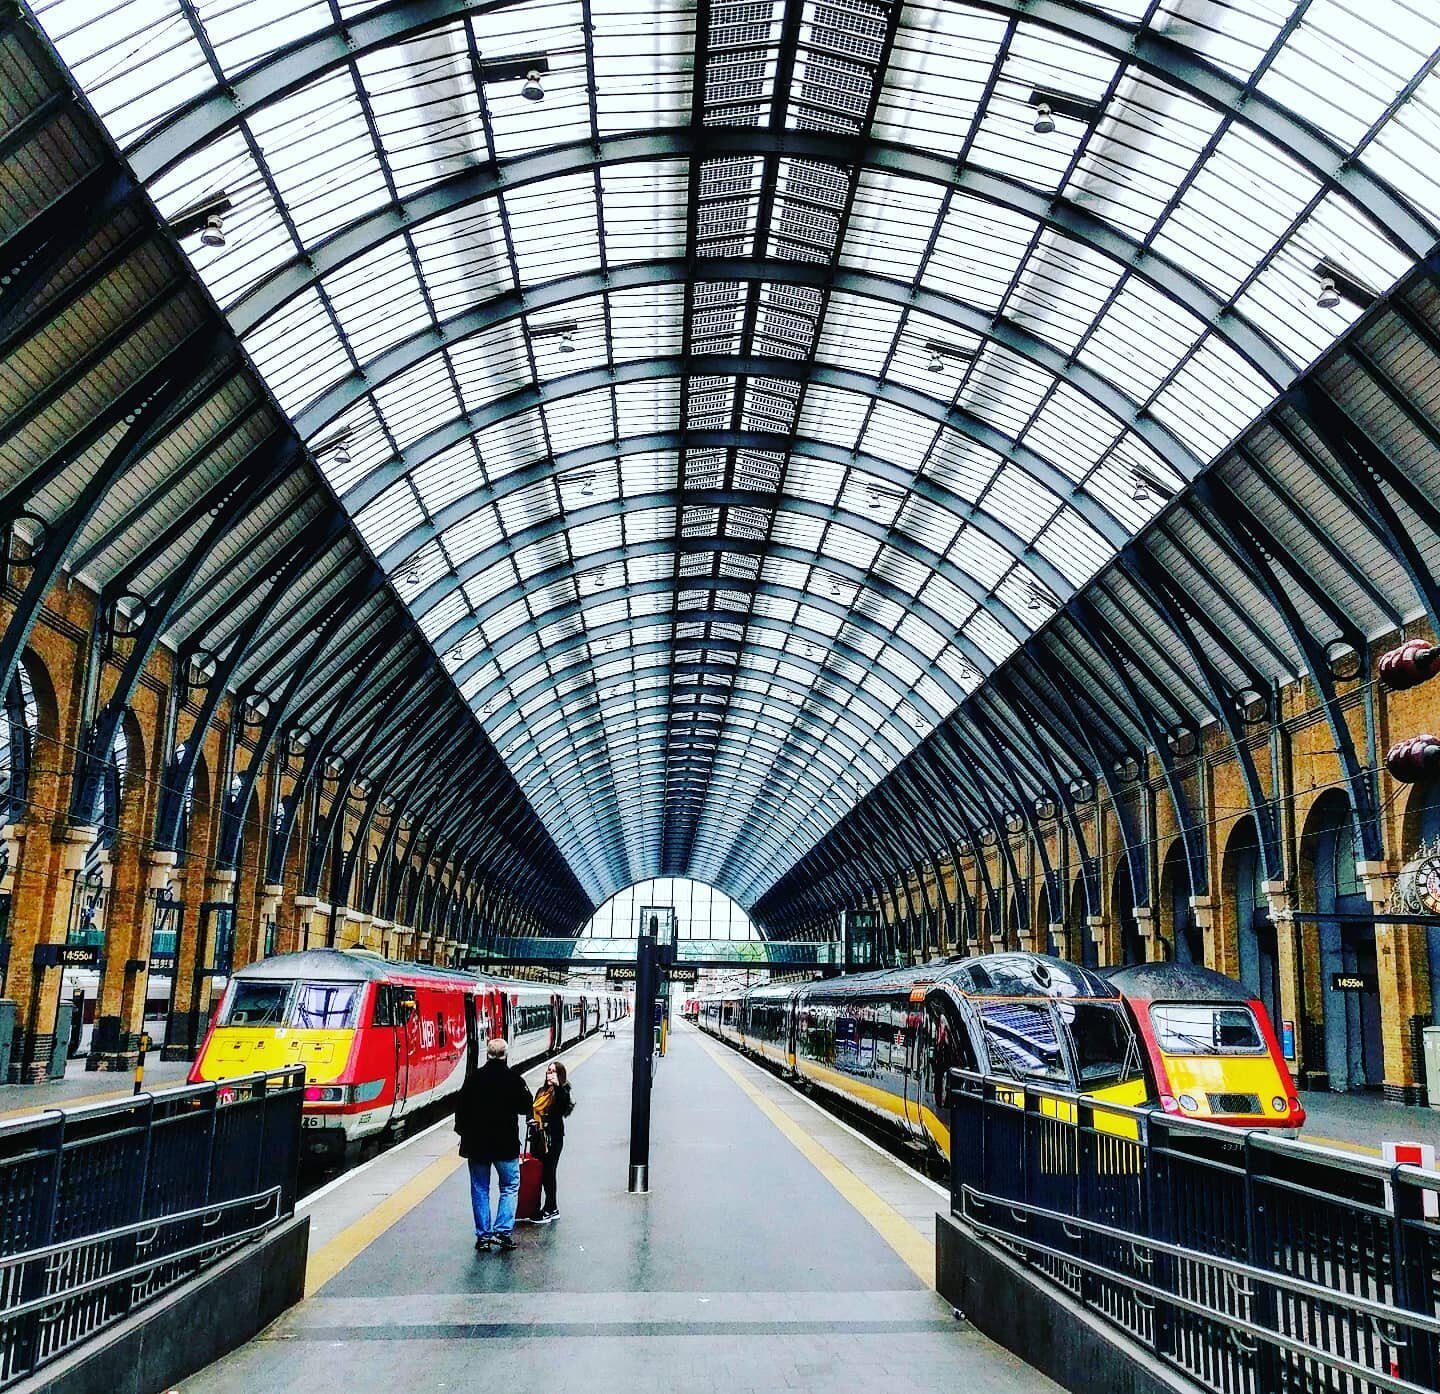 #kingscrossstation is a major train hub in #london🇬🇧 The platforms are beside rows of large #masonry #arches which support large #steel frames for the ceiling of the station. The #trainroute from #londontoedinburgh is a popular route. Even though i